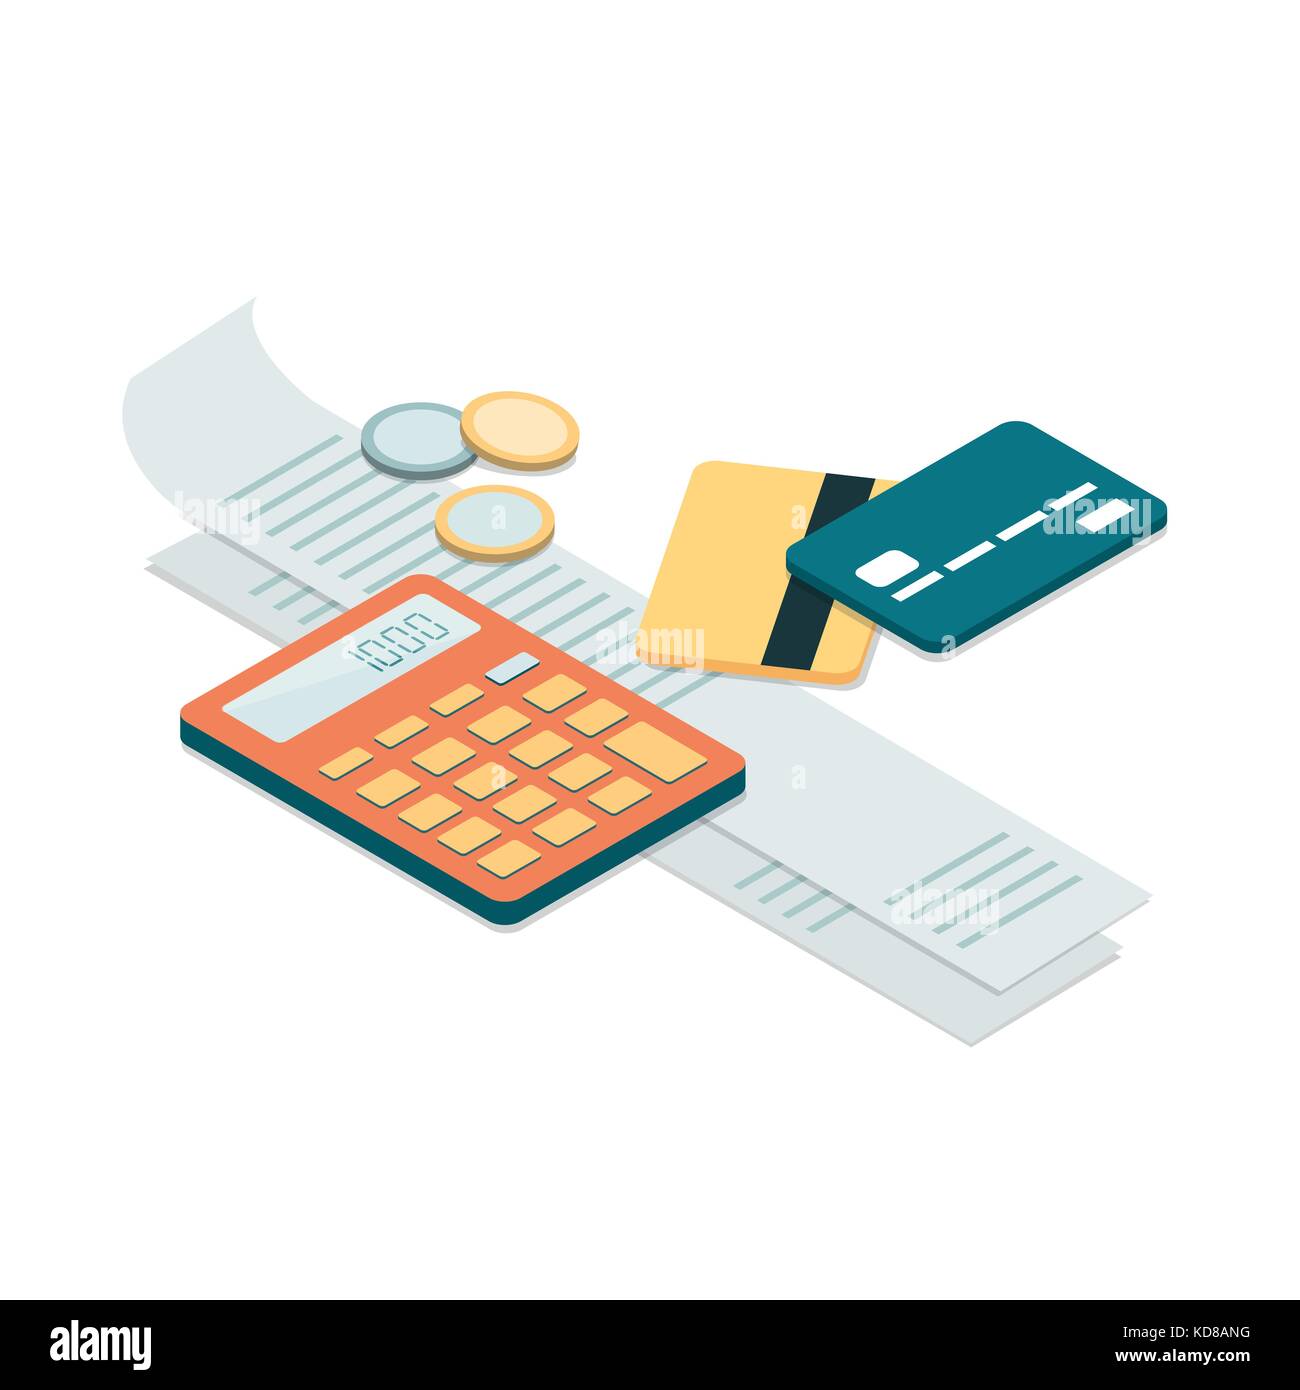 Bills, credit cards and calculator: personal home finance, taxes and payments concept Stock Vector